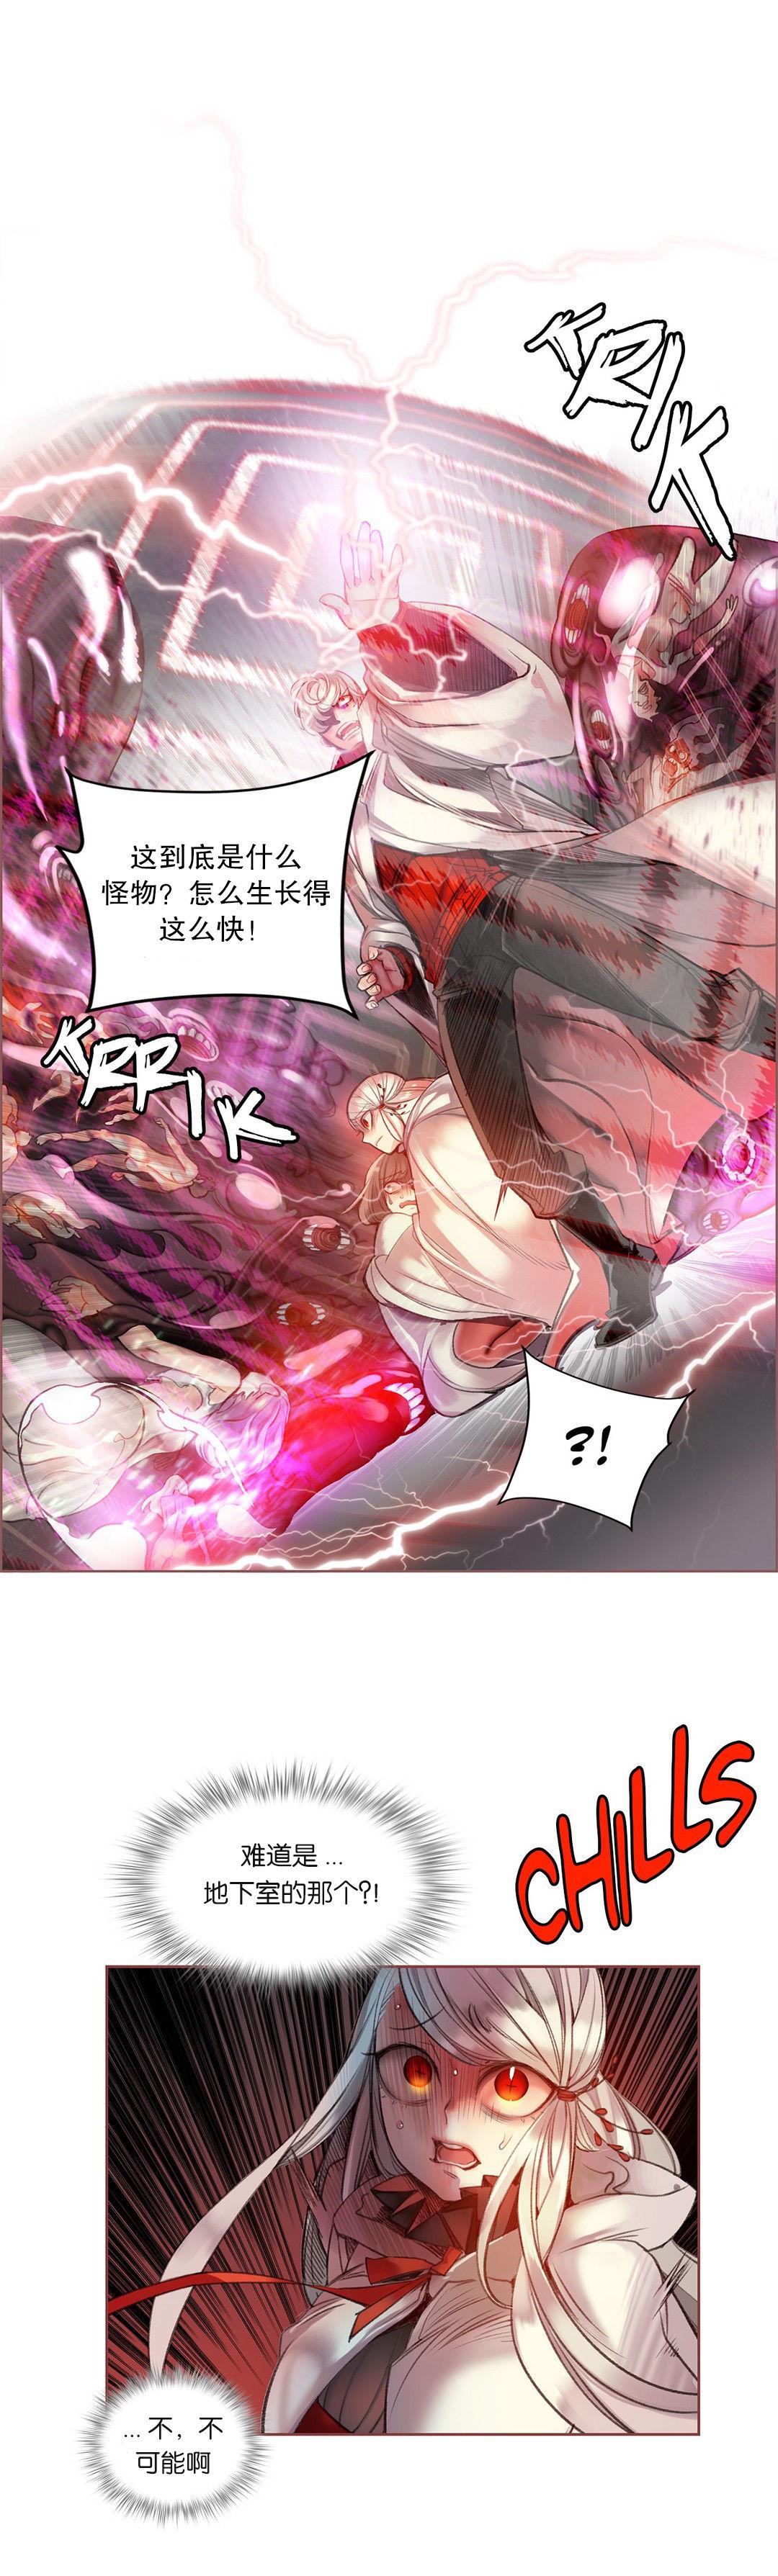 [Juder] Lilith`s Cord (第二季) Ch.61-65 [Chinese] [aaatwist个人汉化] [Ongoing] 20